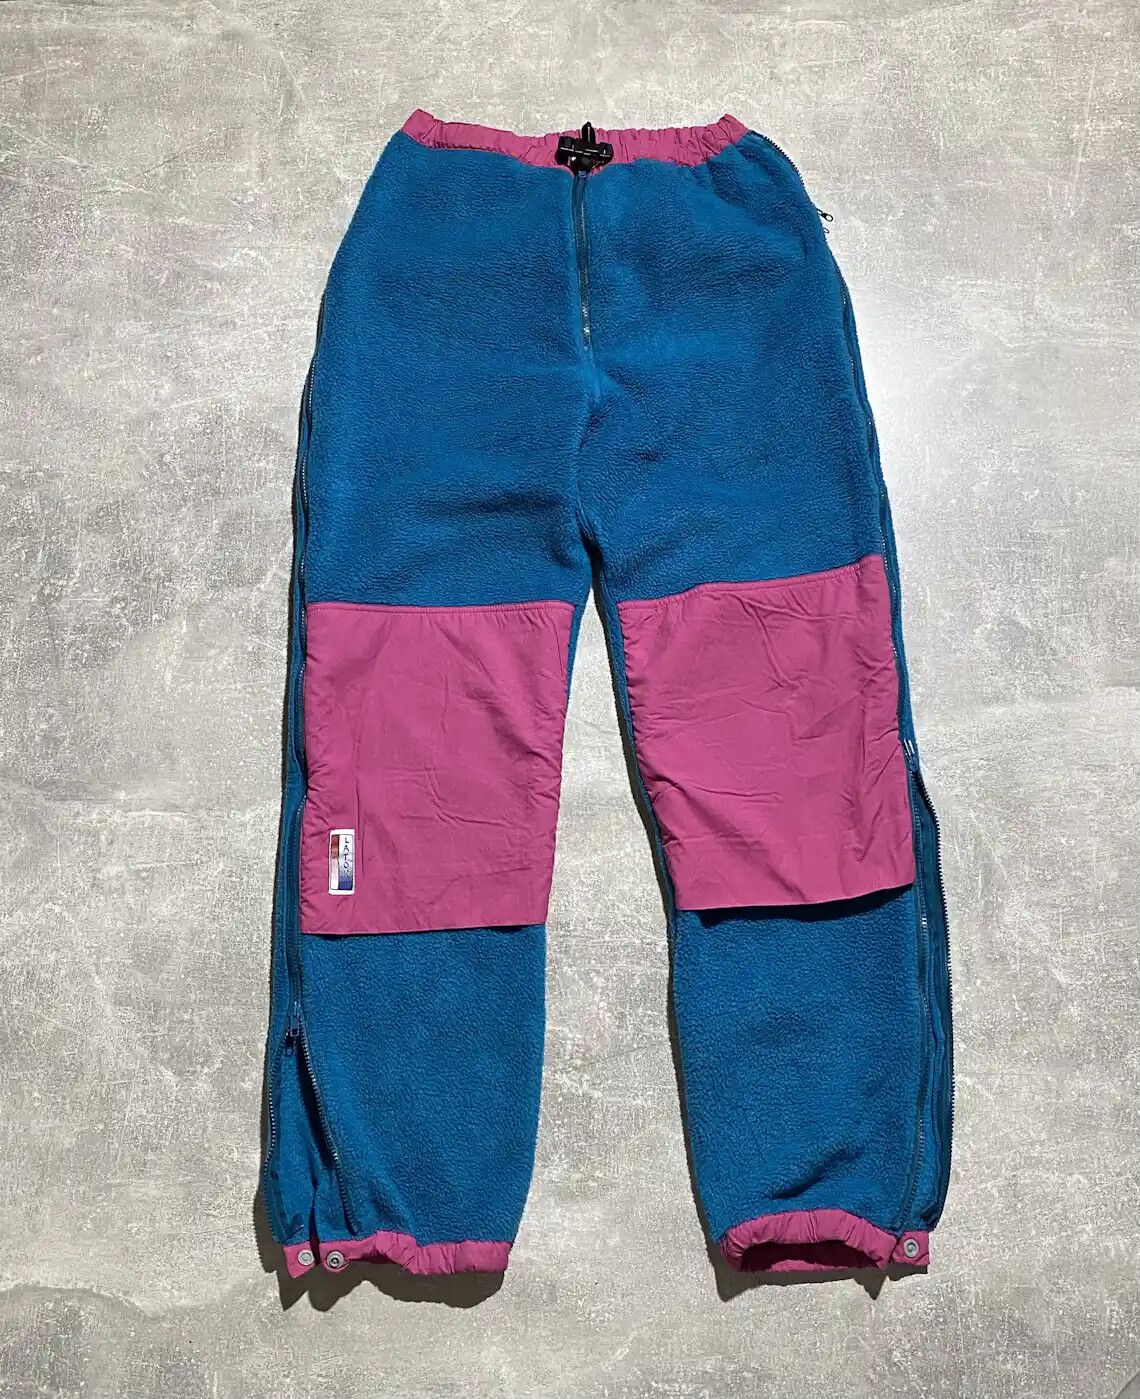 Pre-owned Outdoor Life X Ski Vintage 90's Alpin Lowe Fleece Pants Outdoor Mountain Ski In Blue Pink